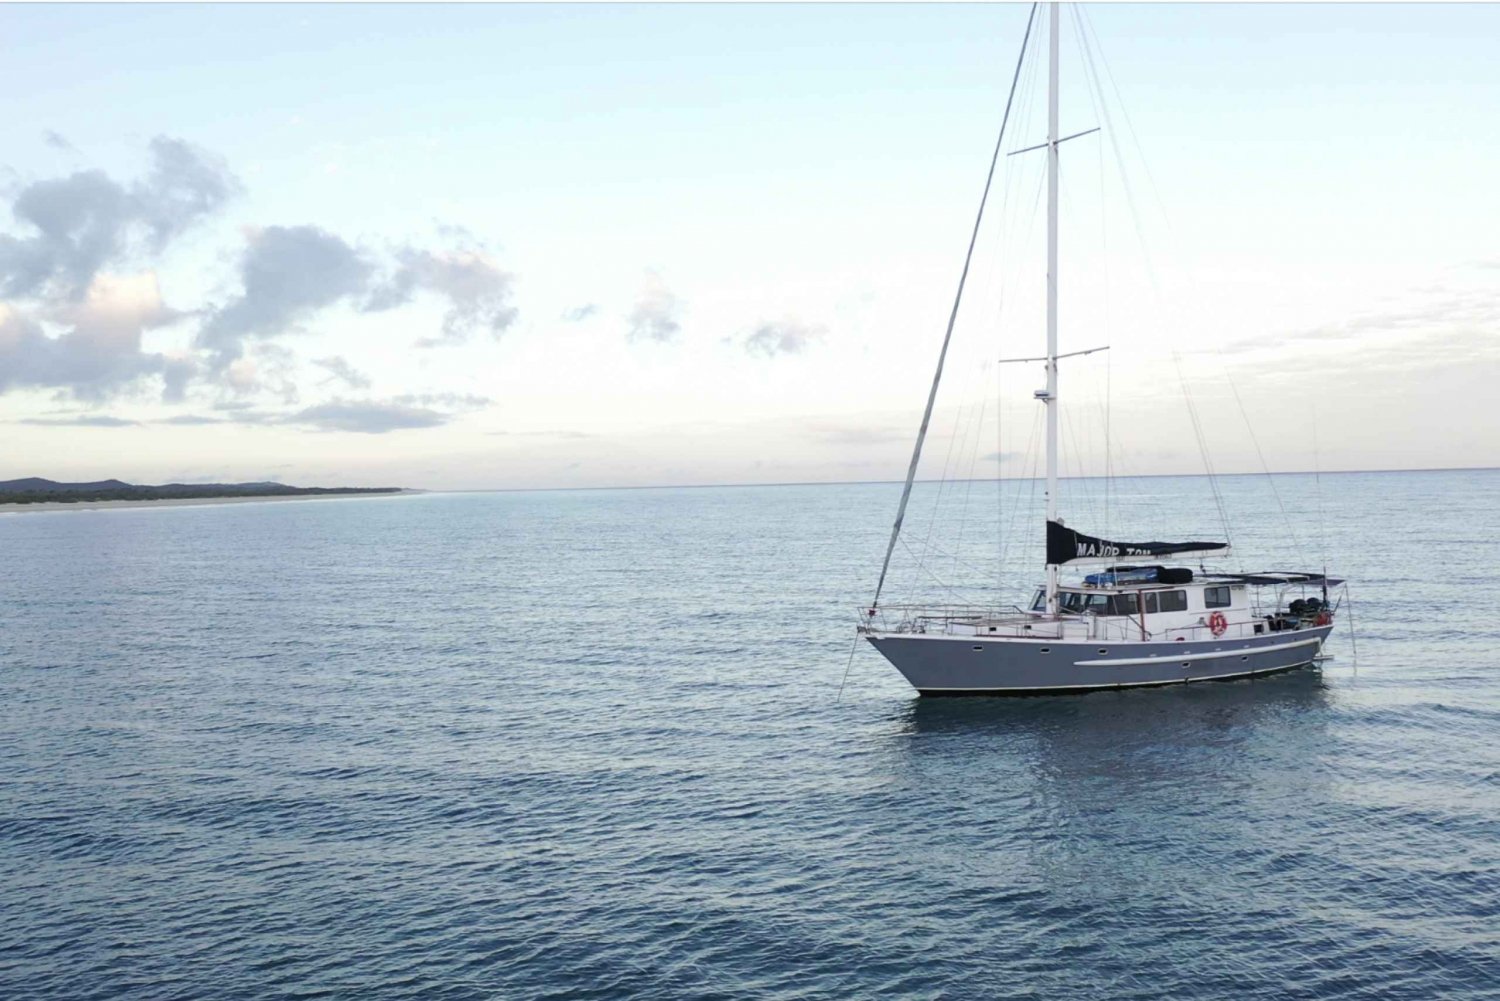 Major Tom - Sail, Snorkelling, Lunch, Day Tour, Boat Cruise